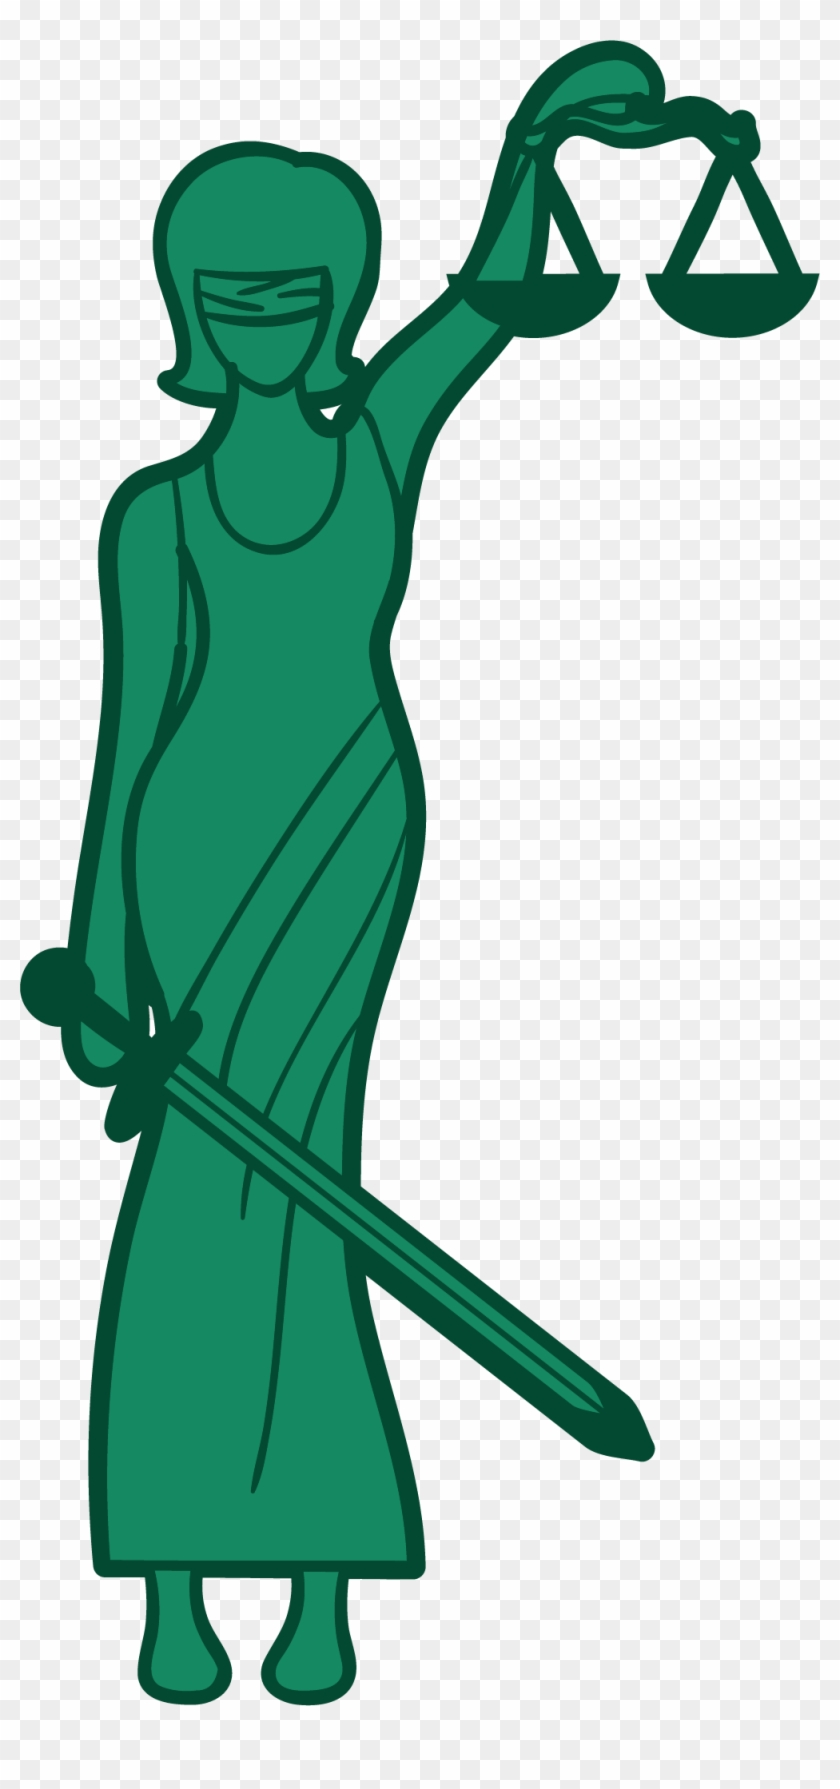 Lady Justice Themis Euclidean Vector Illustration - Lady Justice Themis Euclidean Vector Illustration #300466